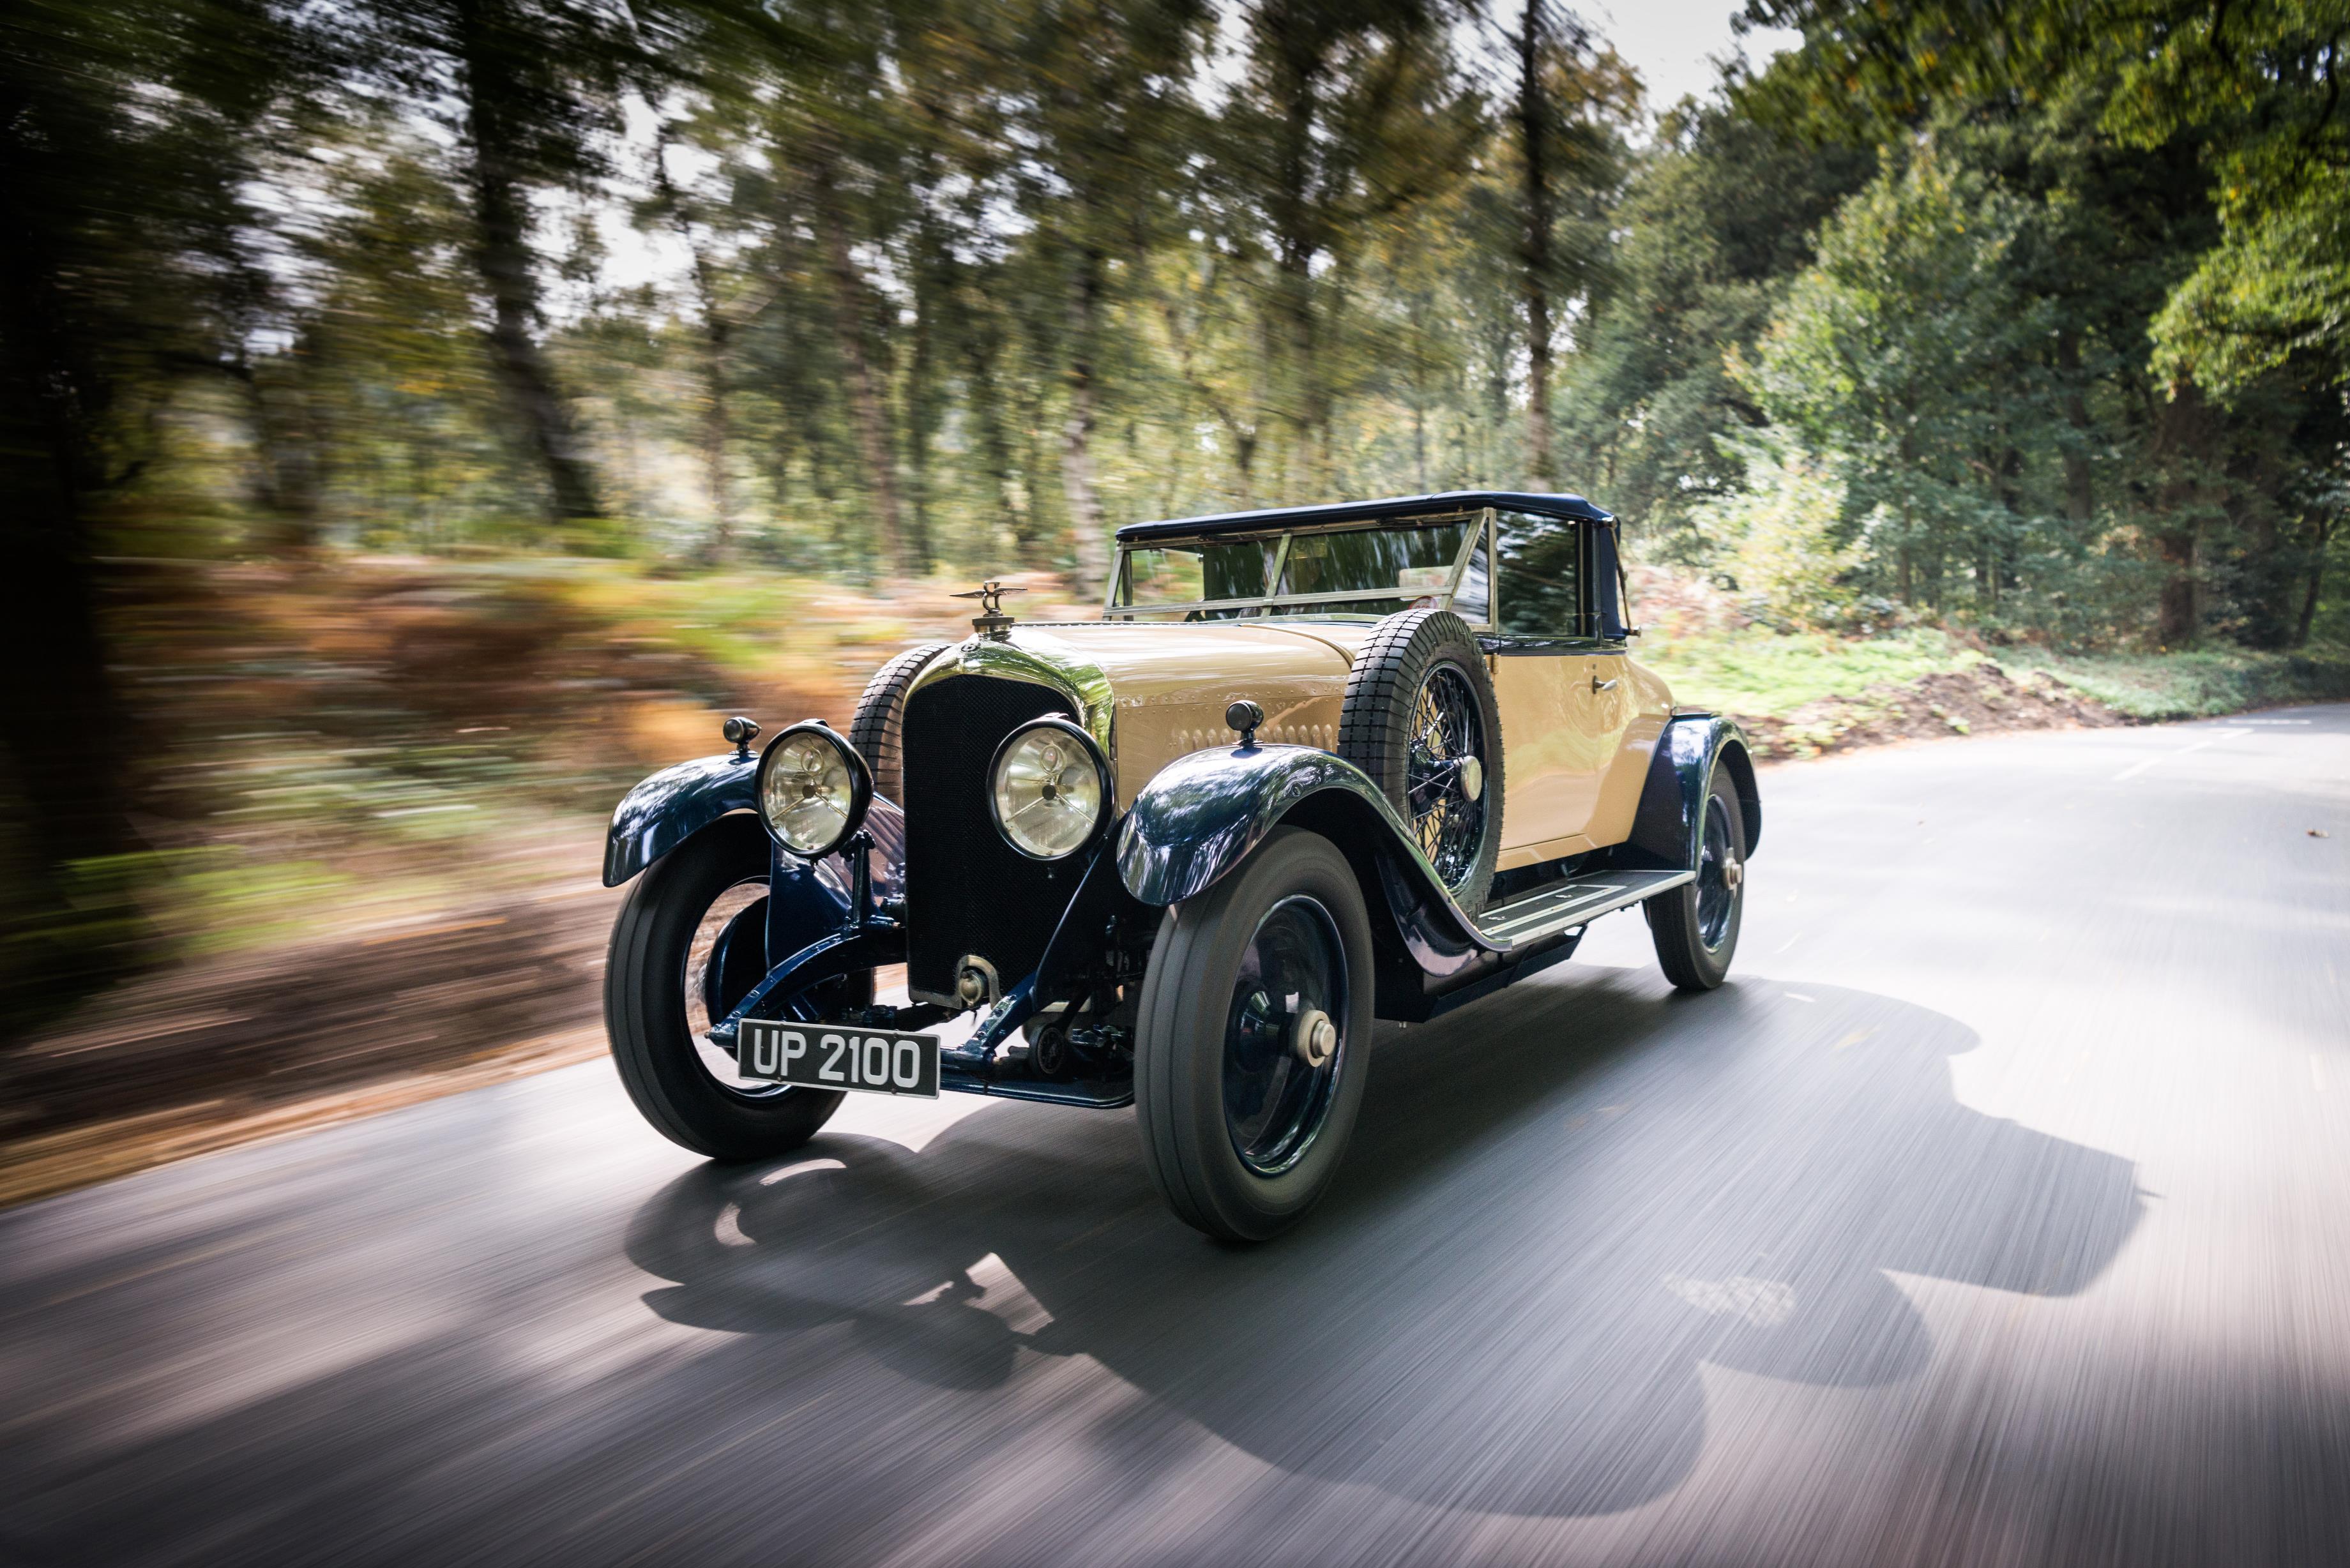 Rare ‘Victor Broom’ bodied Bentley 41/2 Litre brought back to life by William Medcalf.